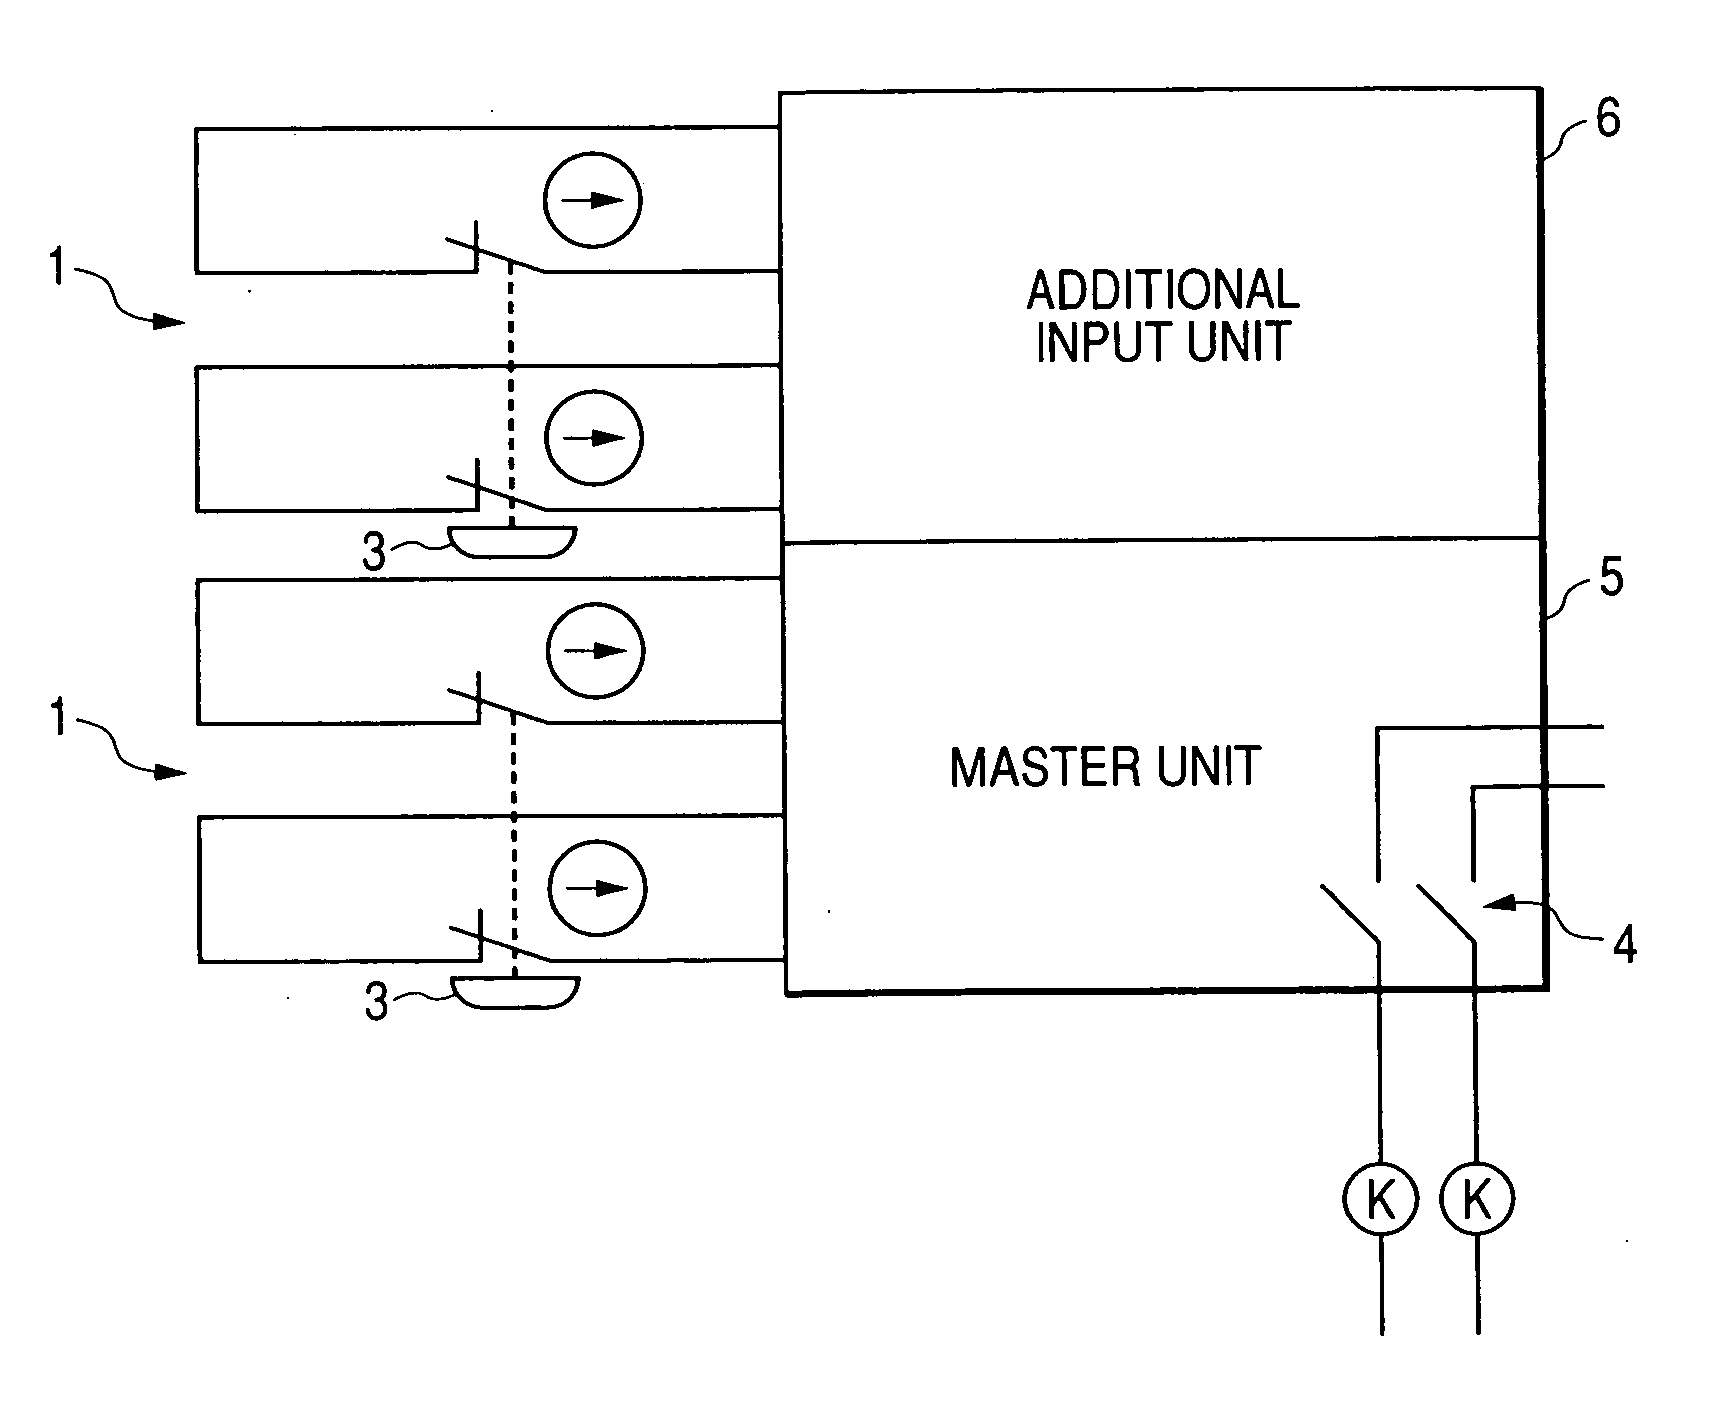 Safety relay system